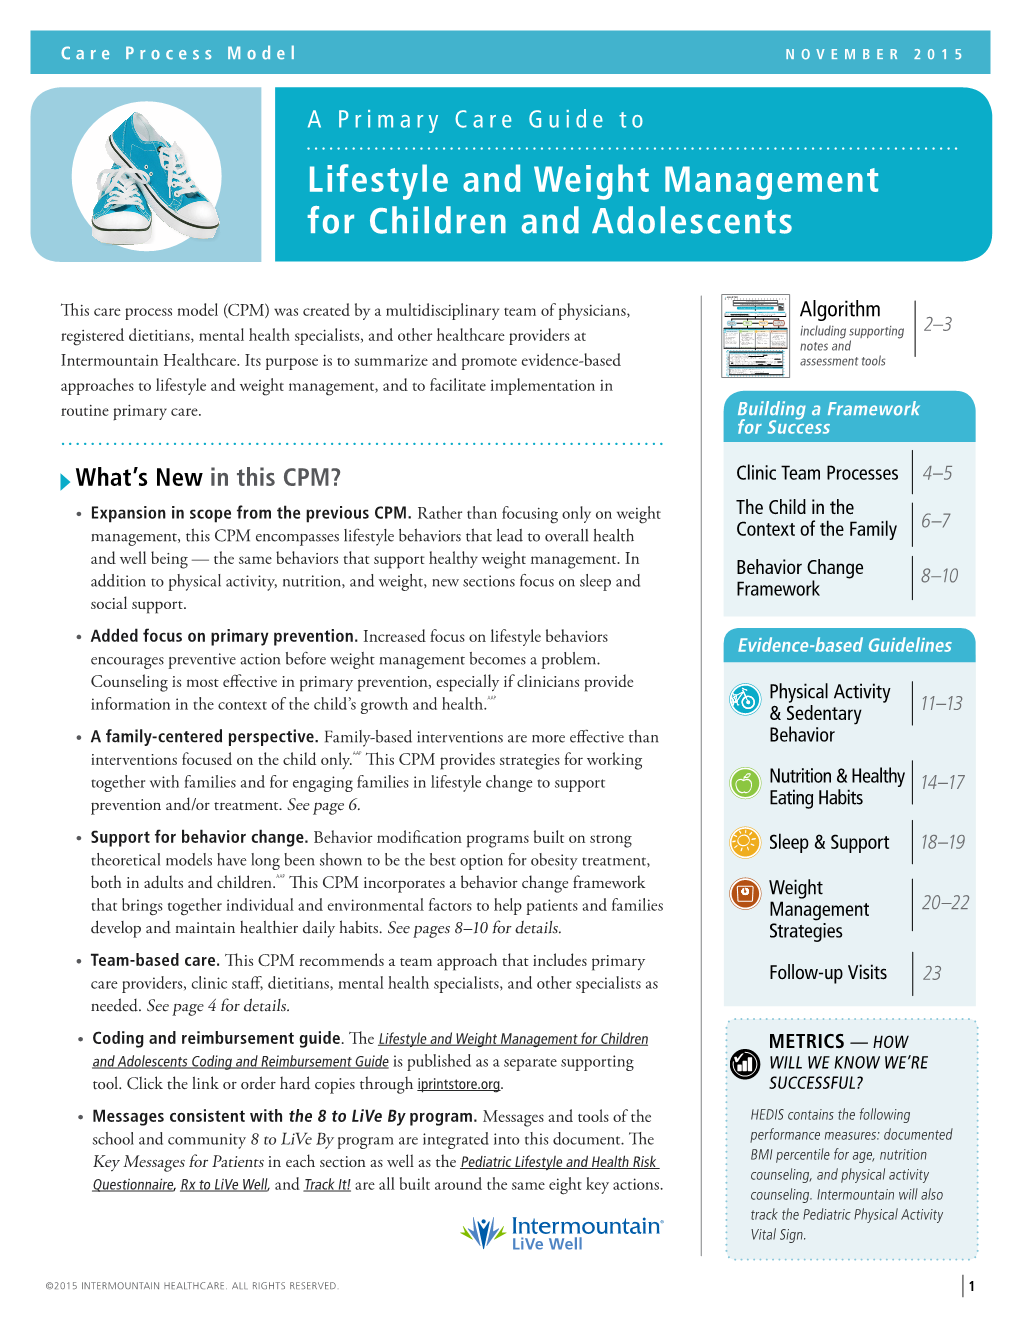 Lifestyle and Weight Management for Children and Adolescents